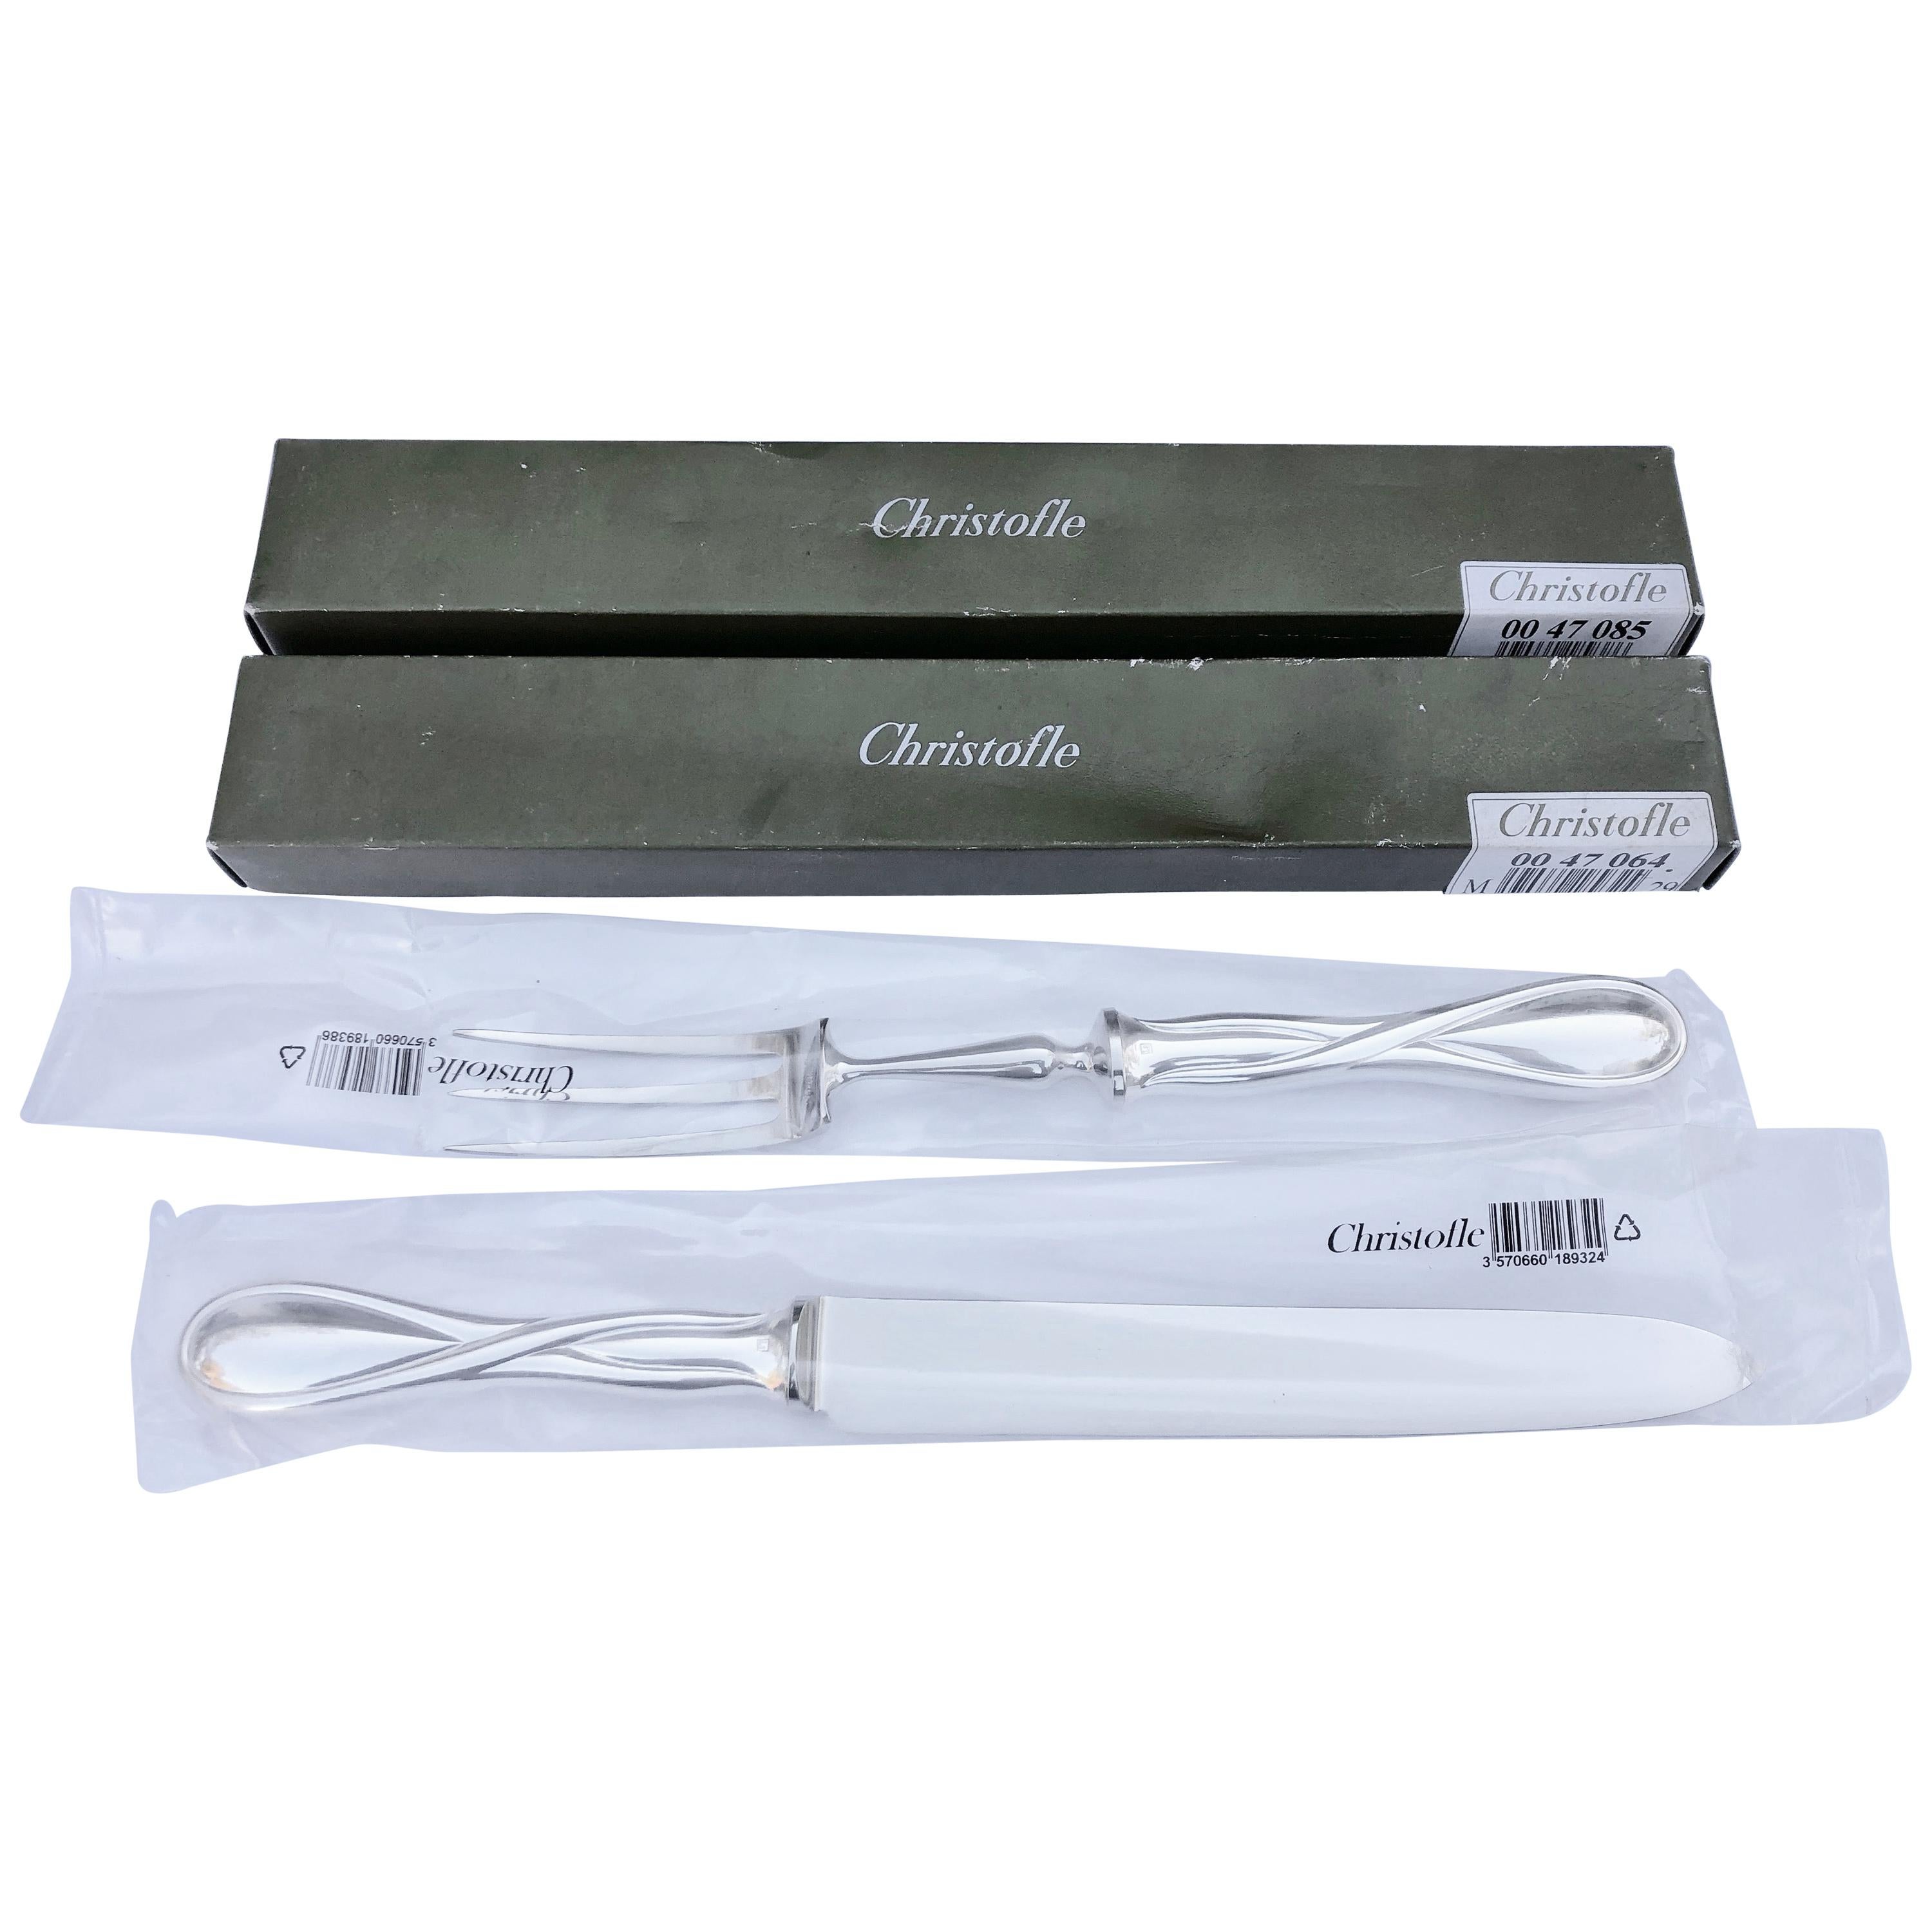 French Christofle Silverplated Galea, Carving Fork and Knife Set, New in Box For Sale